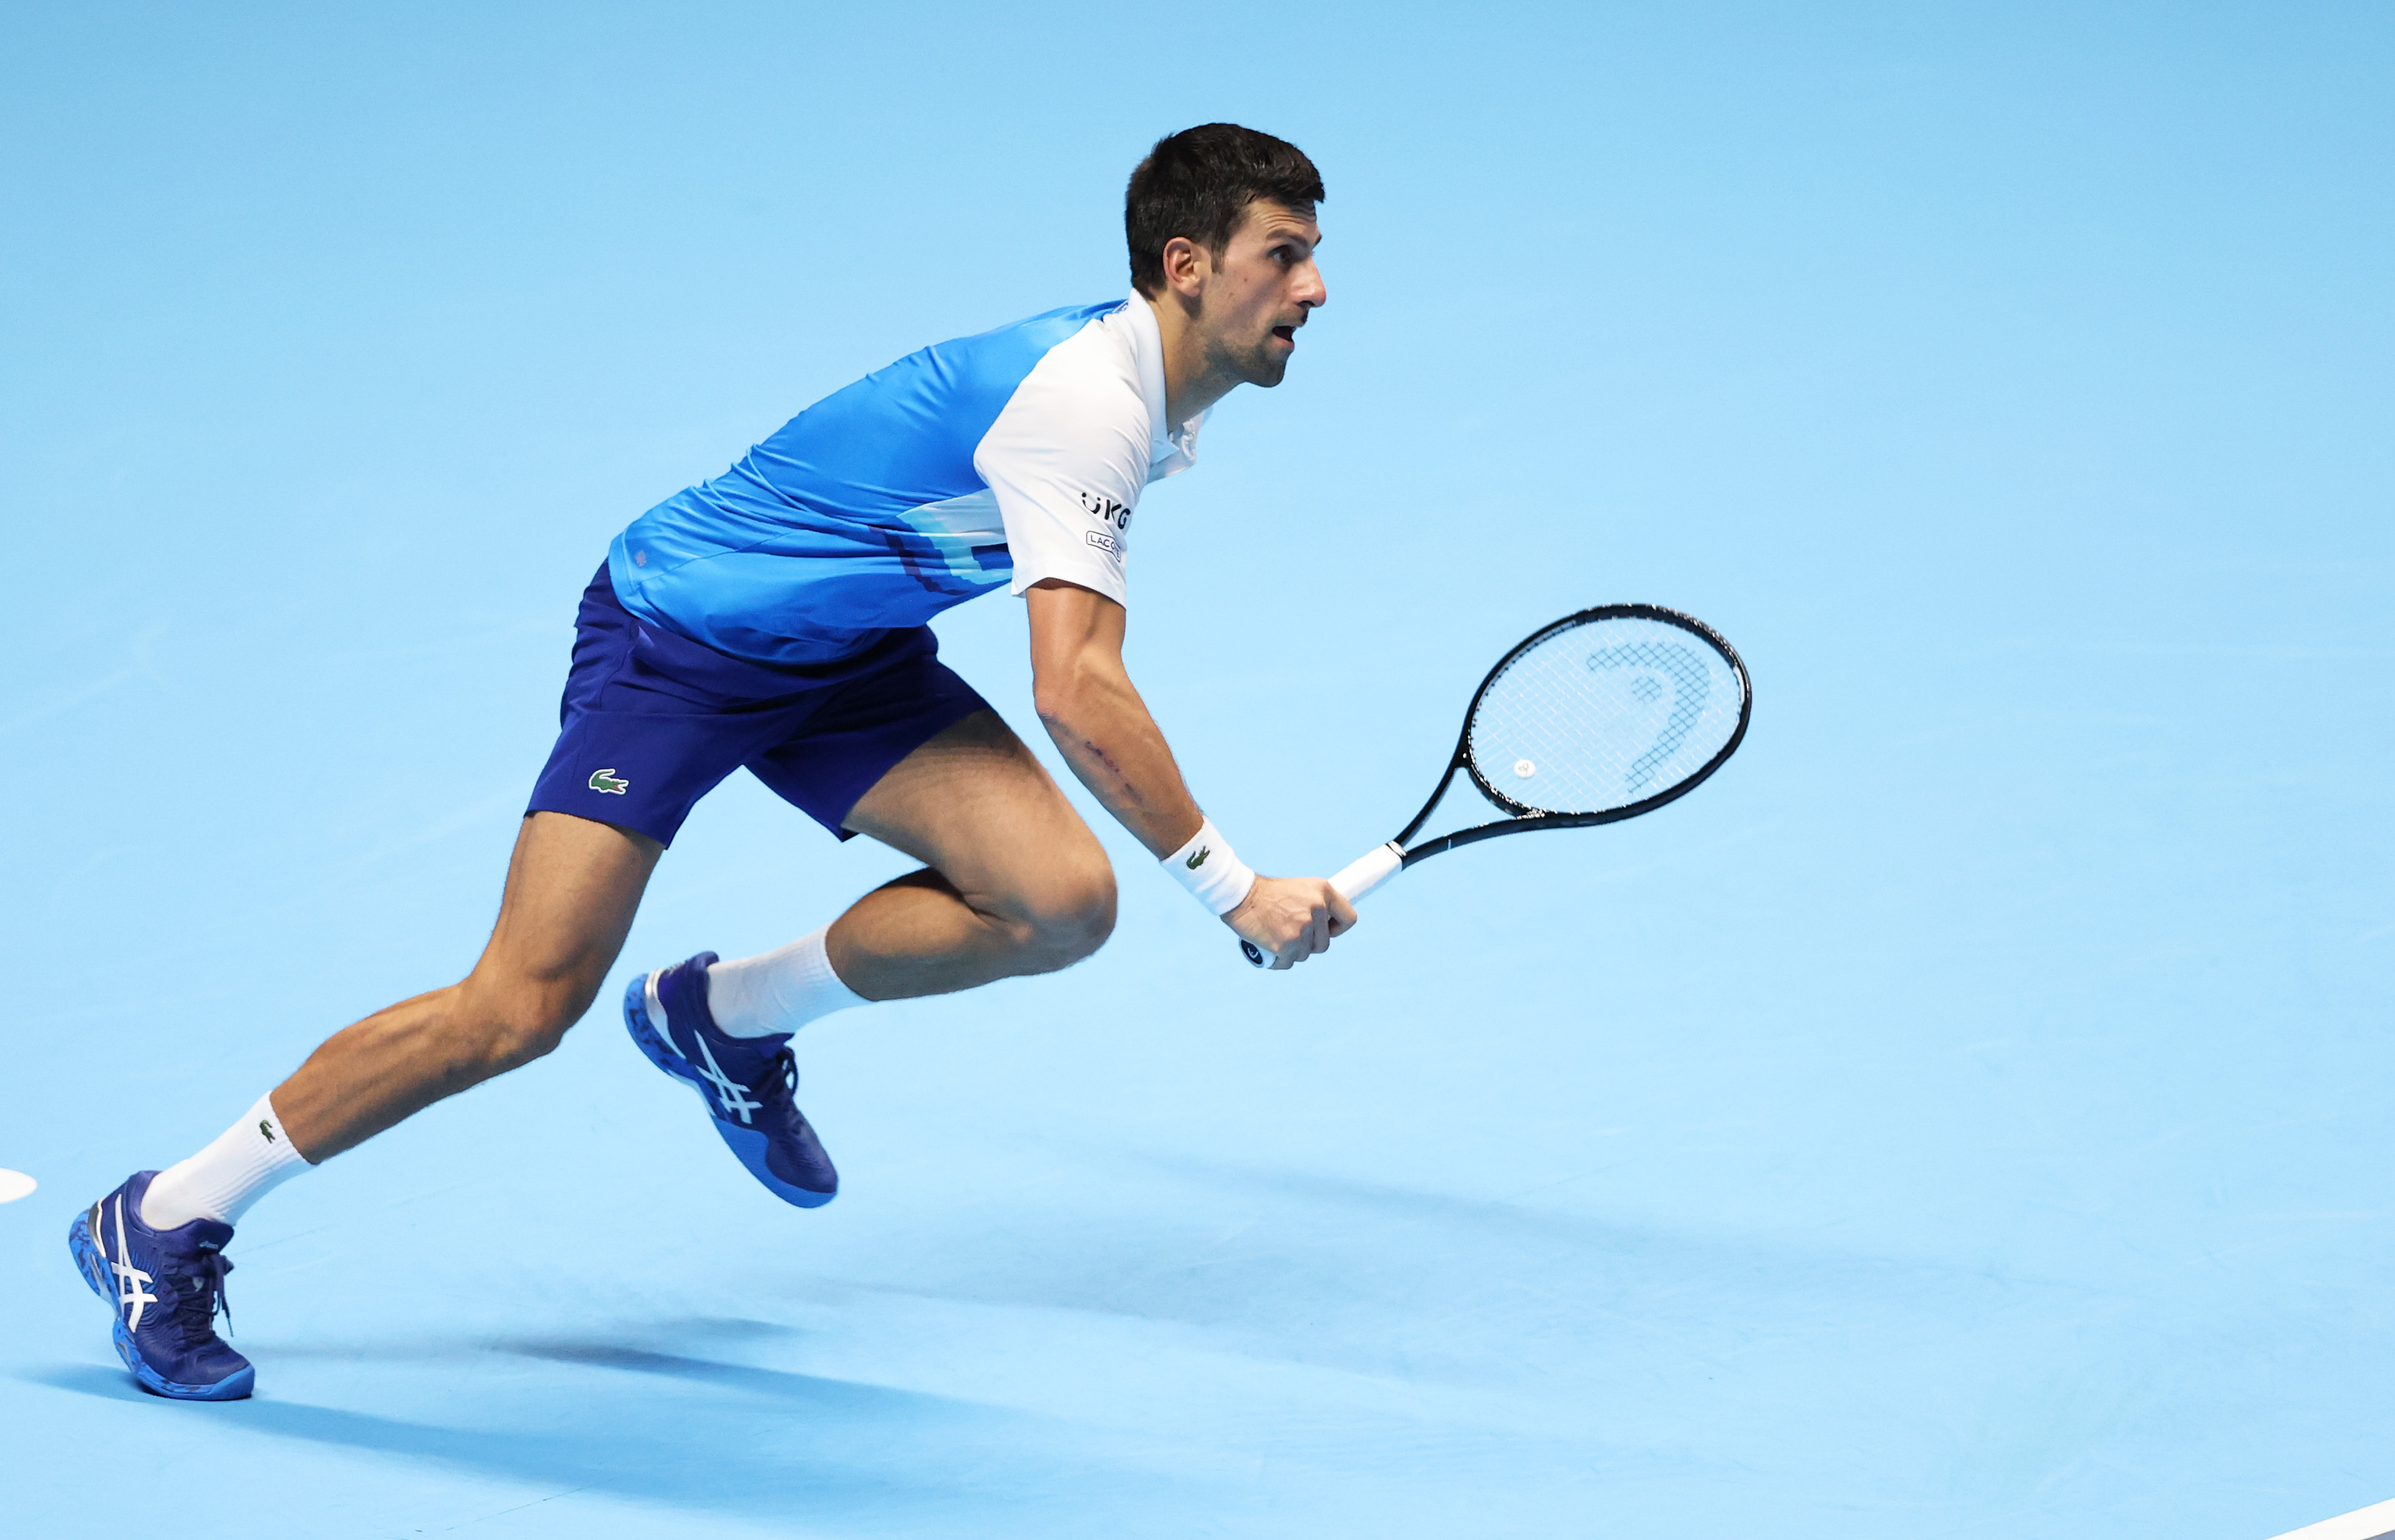 Borrowing a page from idol Sampras, Novak Djokovic serves his way to opening ATP Finals win over Casper Ruud